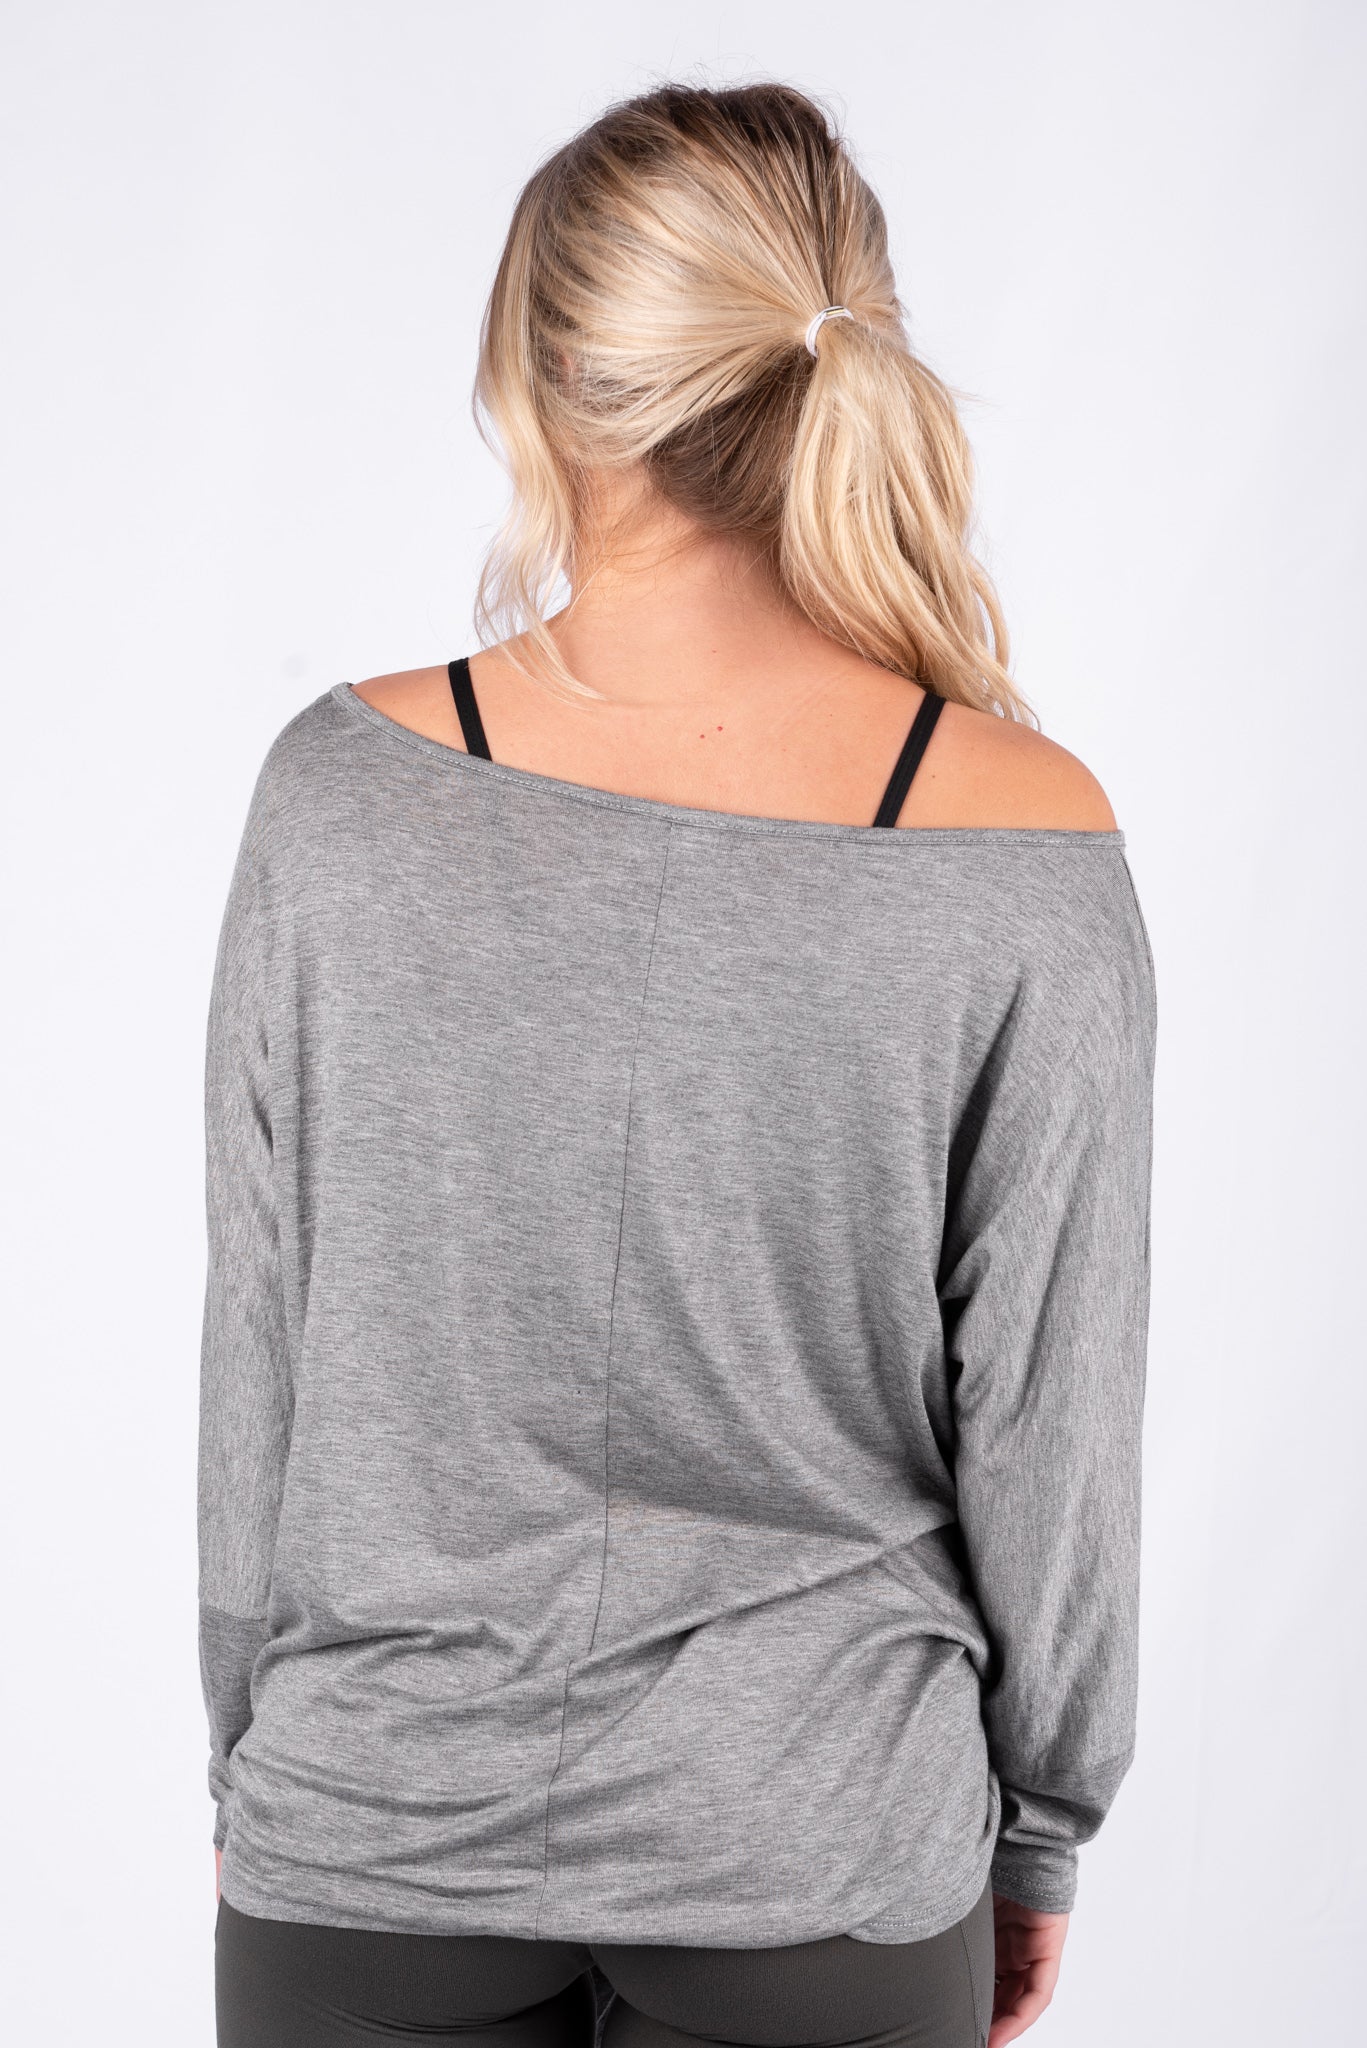 No Off Season long sleeve self tie top heather grey - Fun Top - Stylish and Vibrant Graphic Tee Collection at Lush Fashion Lounge Boutique in OKC